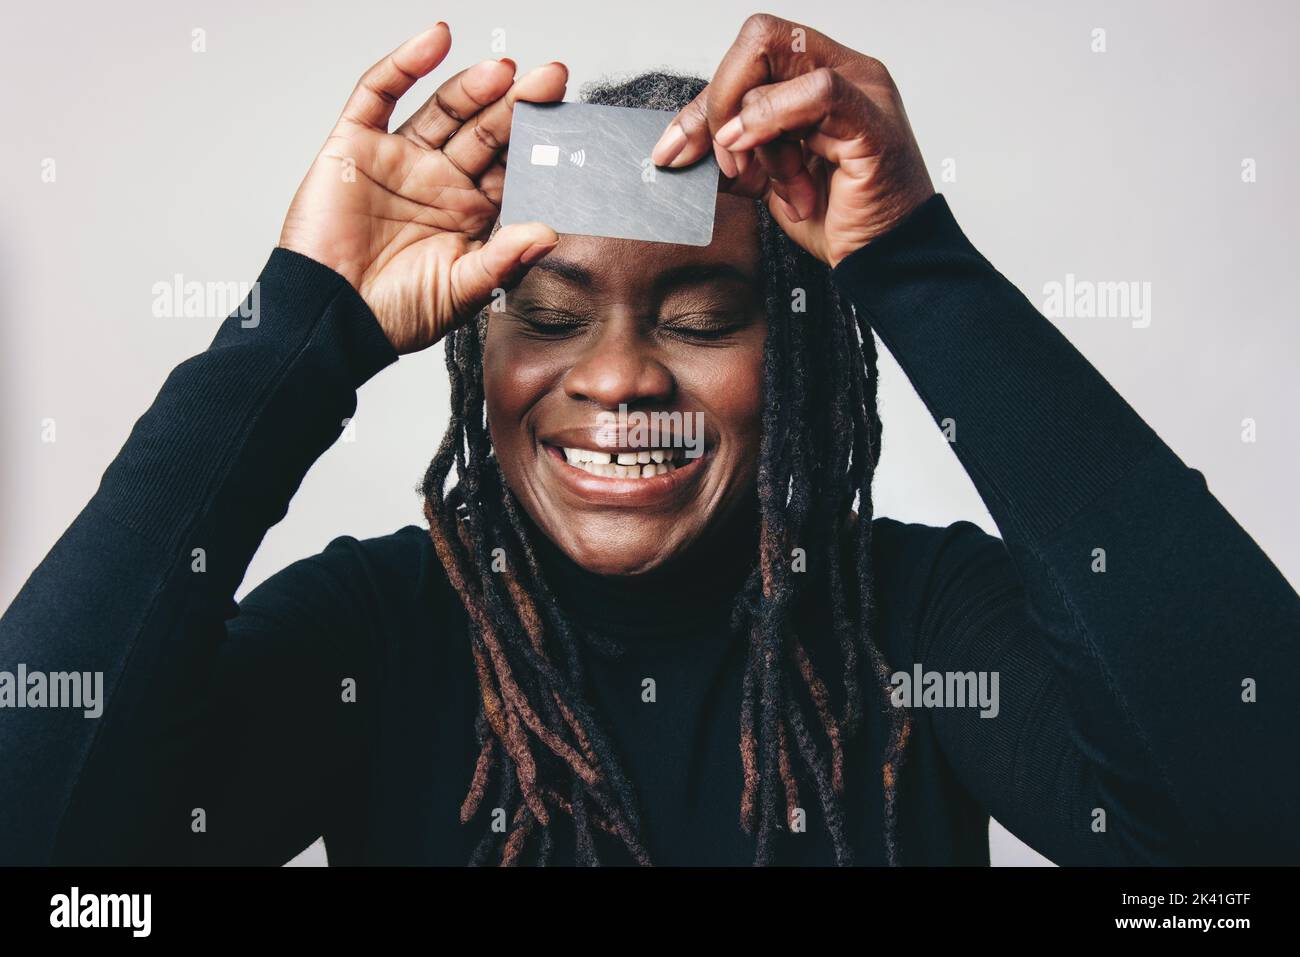 Mature woman with dreadlocks smiling happily while holding a credit card over in front of her forehead. Cheerful middle-aged woman recommending electr Stock Photo